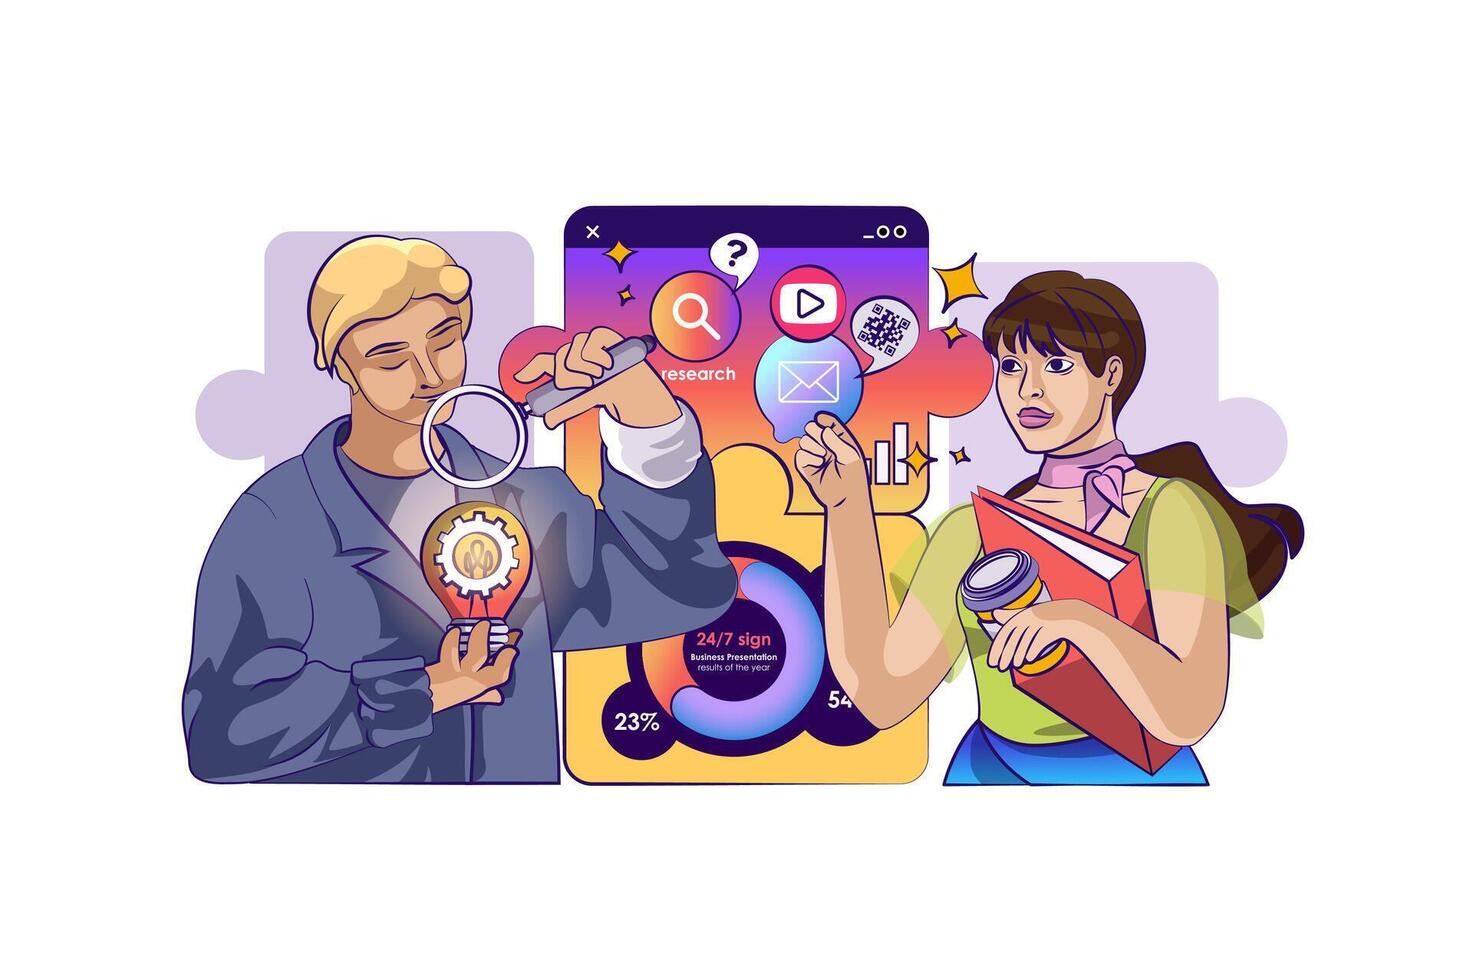 Business solution concept with people scene in flat cartoon design for web. Team searching new ideas and making creative research. Vector illustration for social media banner, marketing material.